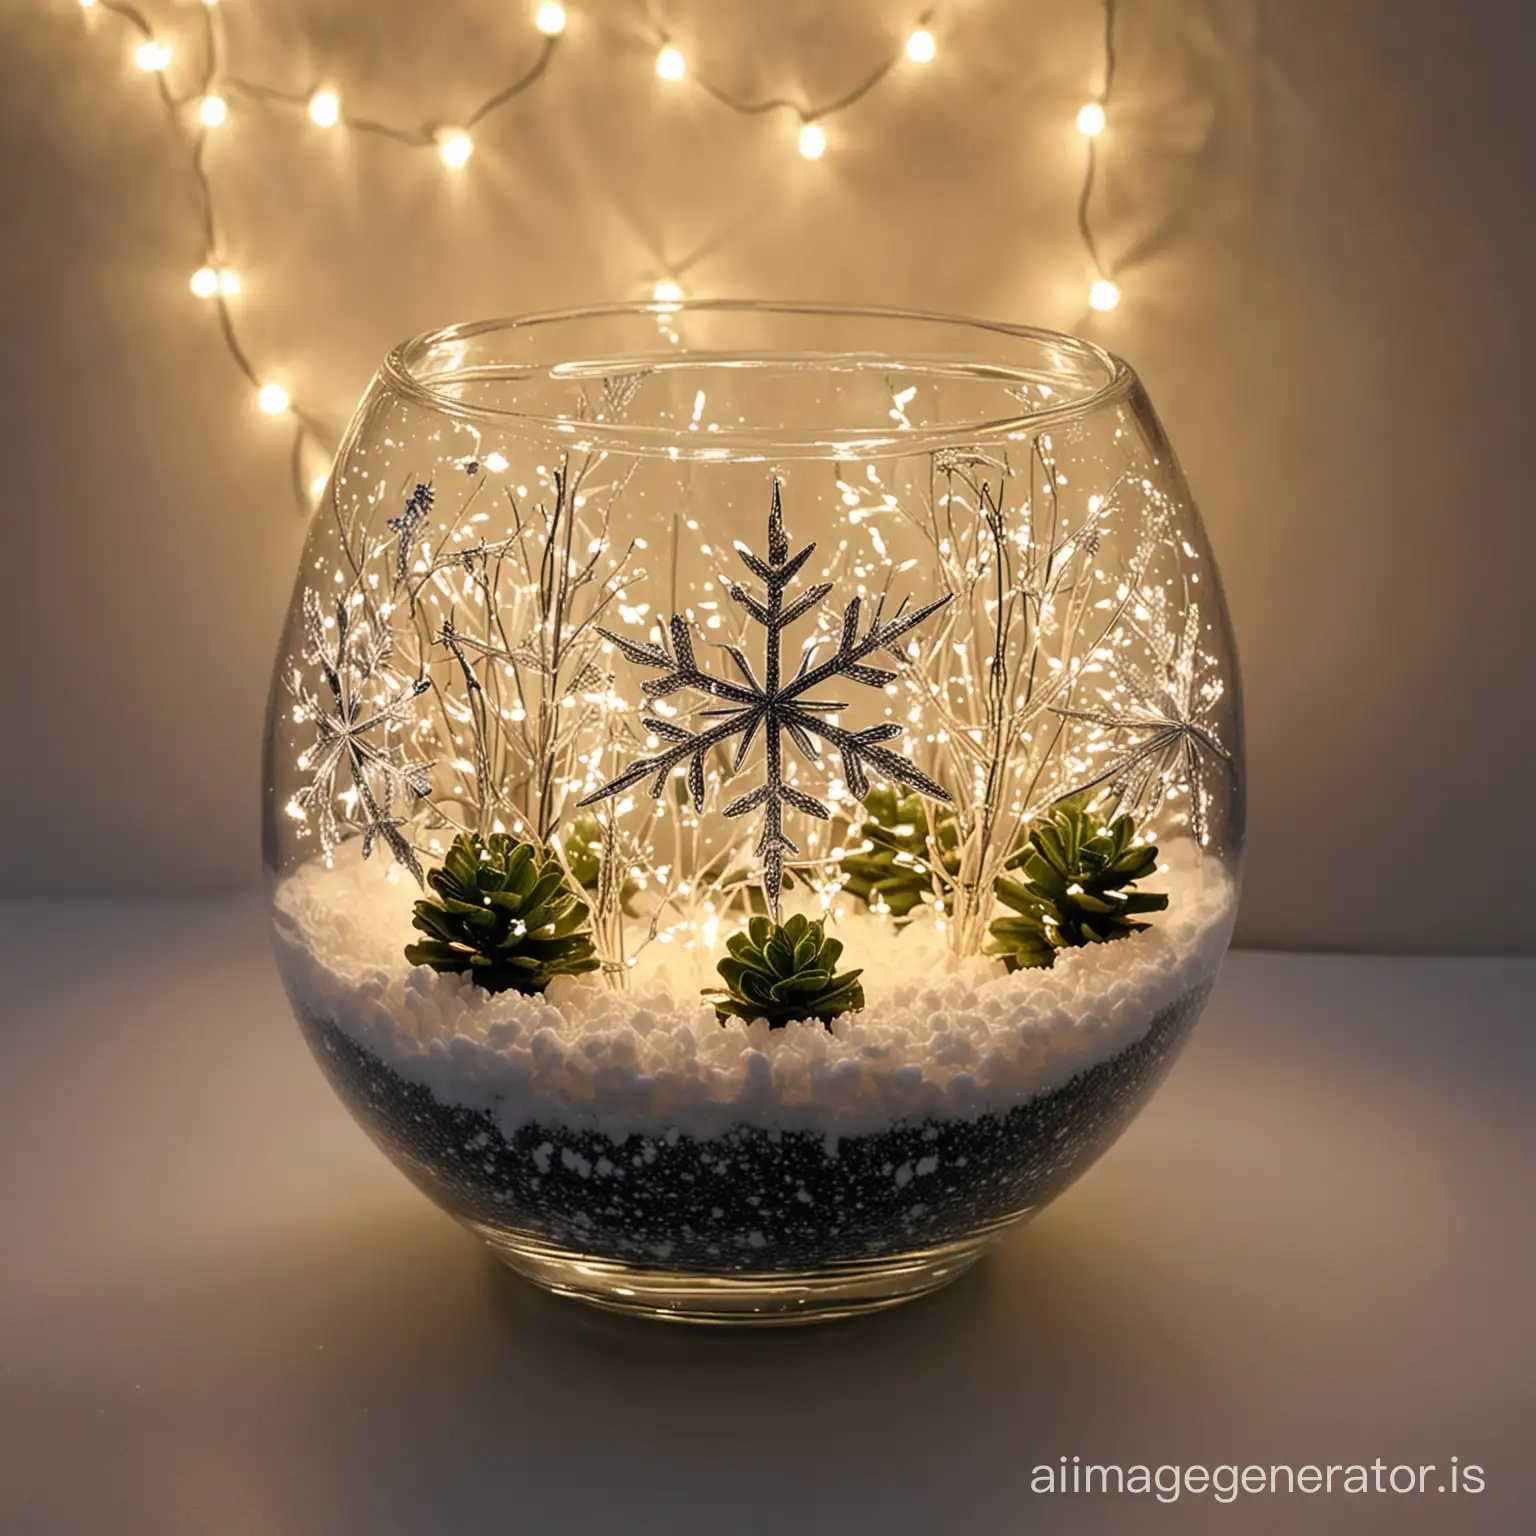 Decorative Glass Vase with Snow and Origami Snowflake under Fairy Lights